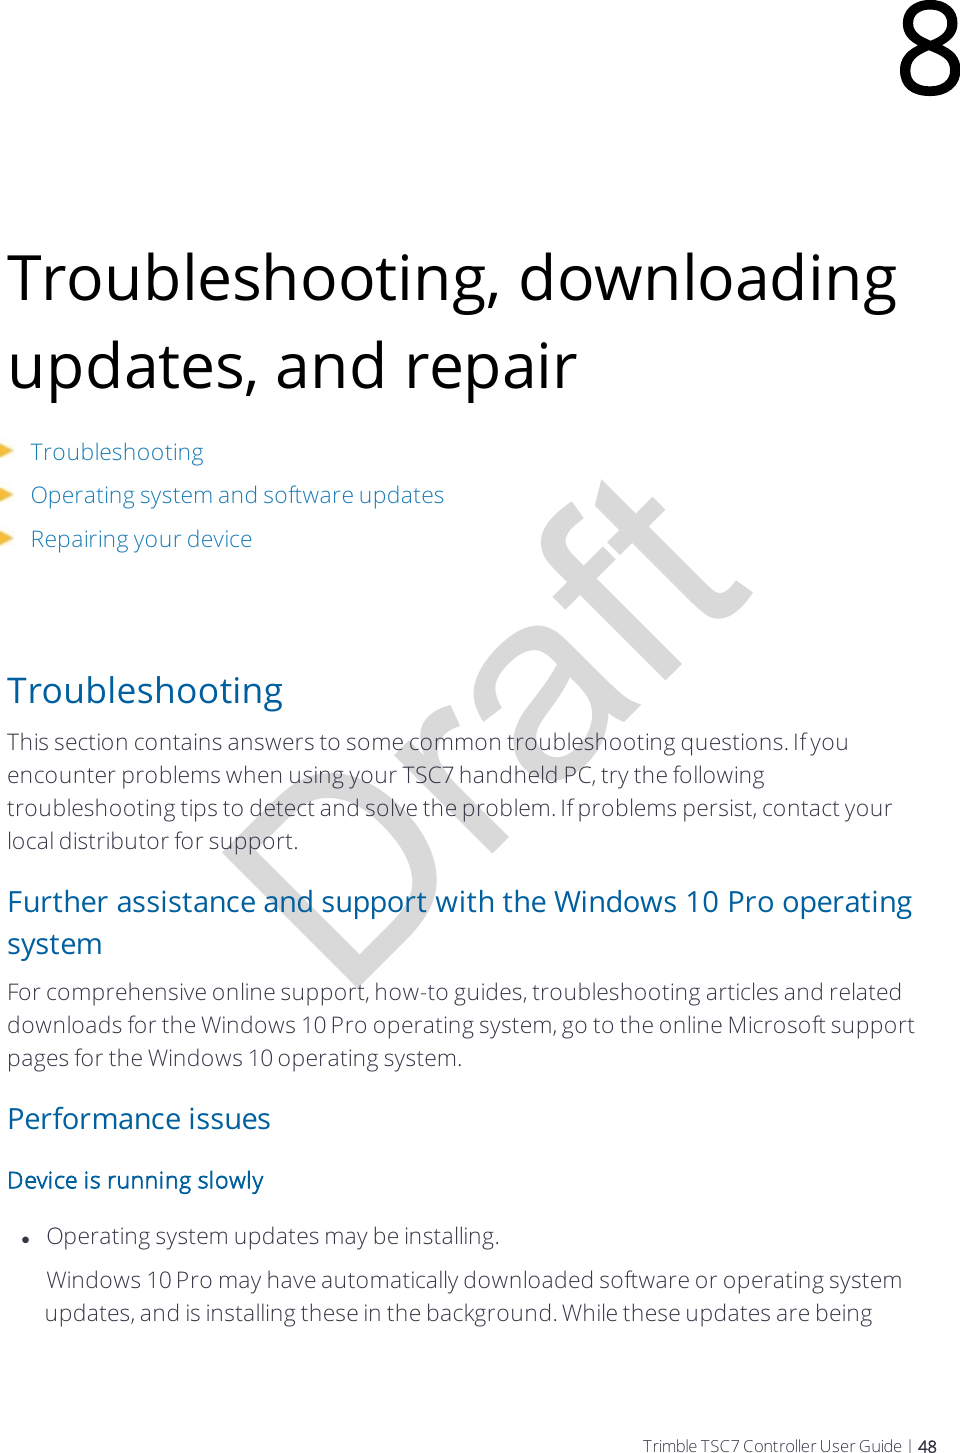 DraftTroubleshooting, downloading updates, and repairTroubleshootingOperating system and software updatesRepairing your deviceTroubleshootingThis section contains answers to some common troubleshooting questions. If you encounter problems when using your TSC7 handheld PC, try the following troubleshooting tips to detect and solve the problem. If problems persist, contact your local distributor for support.Further assistance and support with the Windows 10 Pro operating systemFor comprehensive online support, how-to guides, troubleshooting articles and related downloads for the Windows 10 Pro operating system, go to the online Microsoft support pages for the Windows 10 operating system.Performance issuesDevice is running slowlylOperating system updates may be installing.    Windows 10 Pro may have automatically downloaded software or operating system updates, and is installing these in the background. While these updates are being 8Trimble TSC7 Controller User Guide | 48